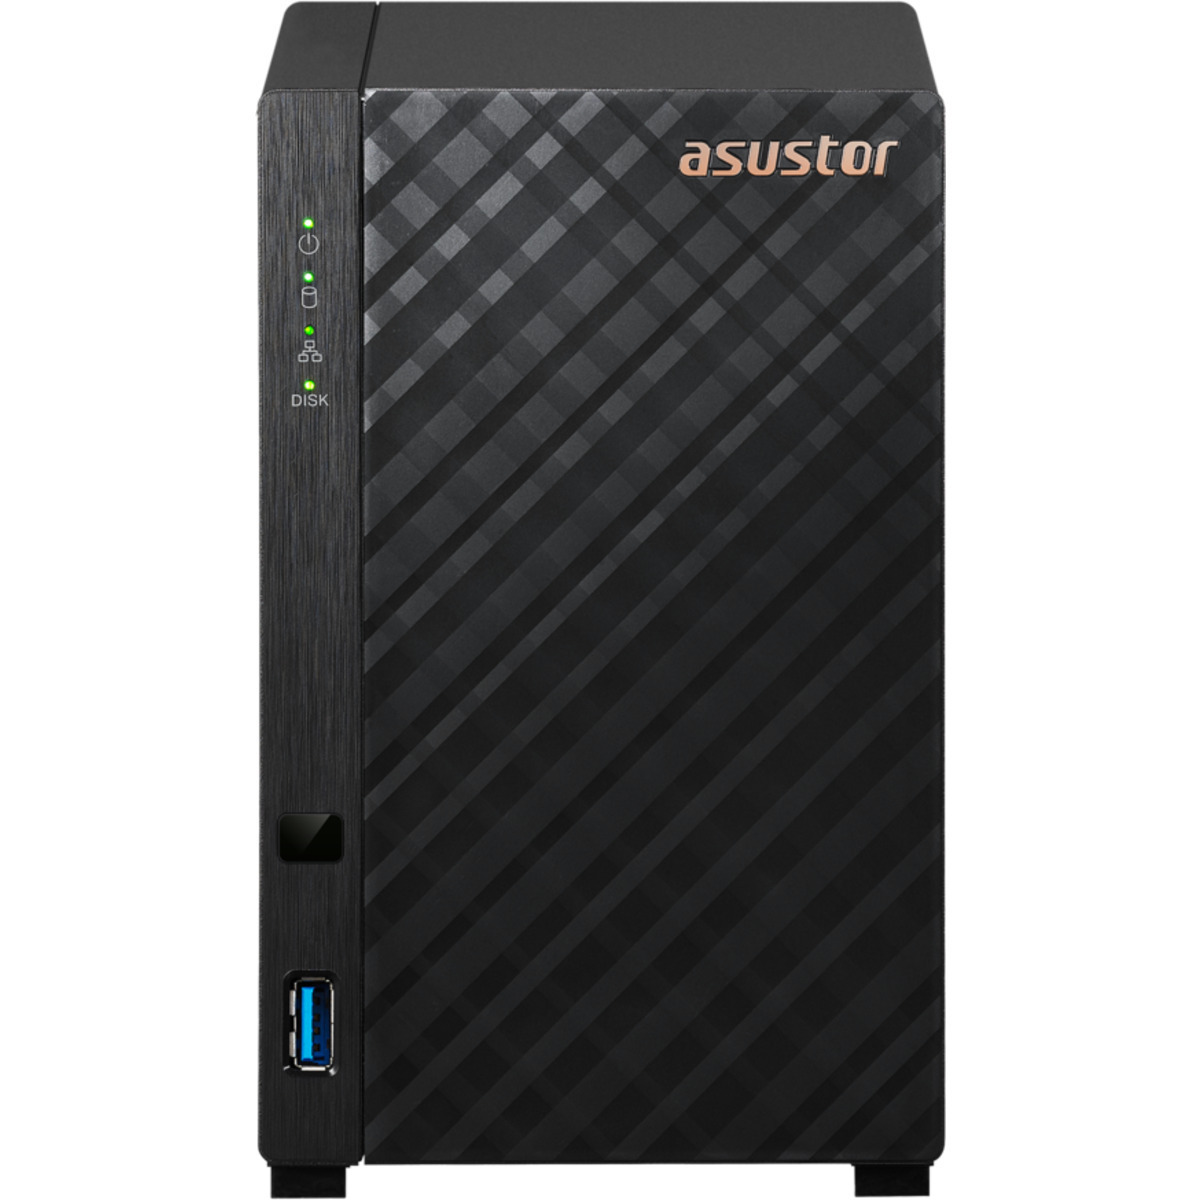 ASUSTOR DRIVESTOR 2 Lite AS1102TL 12tb 2-Bay Desktop Personal / Basic Home / Small Office NAS - Network Attached Storage Device 1x12tb Seagate IronWolf Pro ST12000NT001 3.5 7200rpm SATA 6Gb/s HDD NAS Class Drives Installed - Burn-In Tested - ON SALE DRIVESTOR 2 Lite AS1102TL